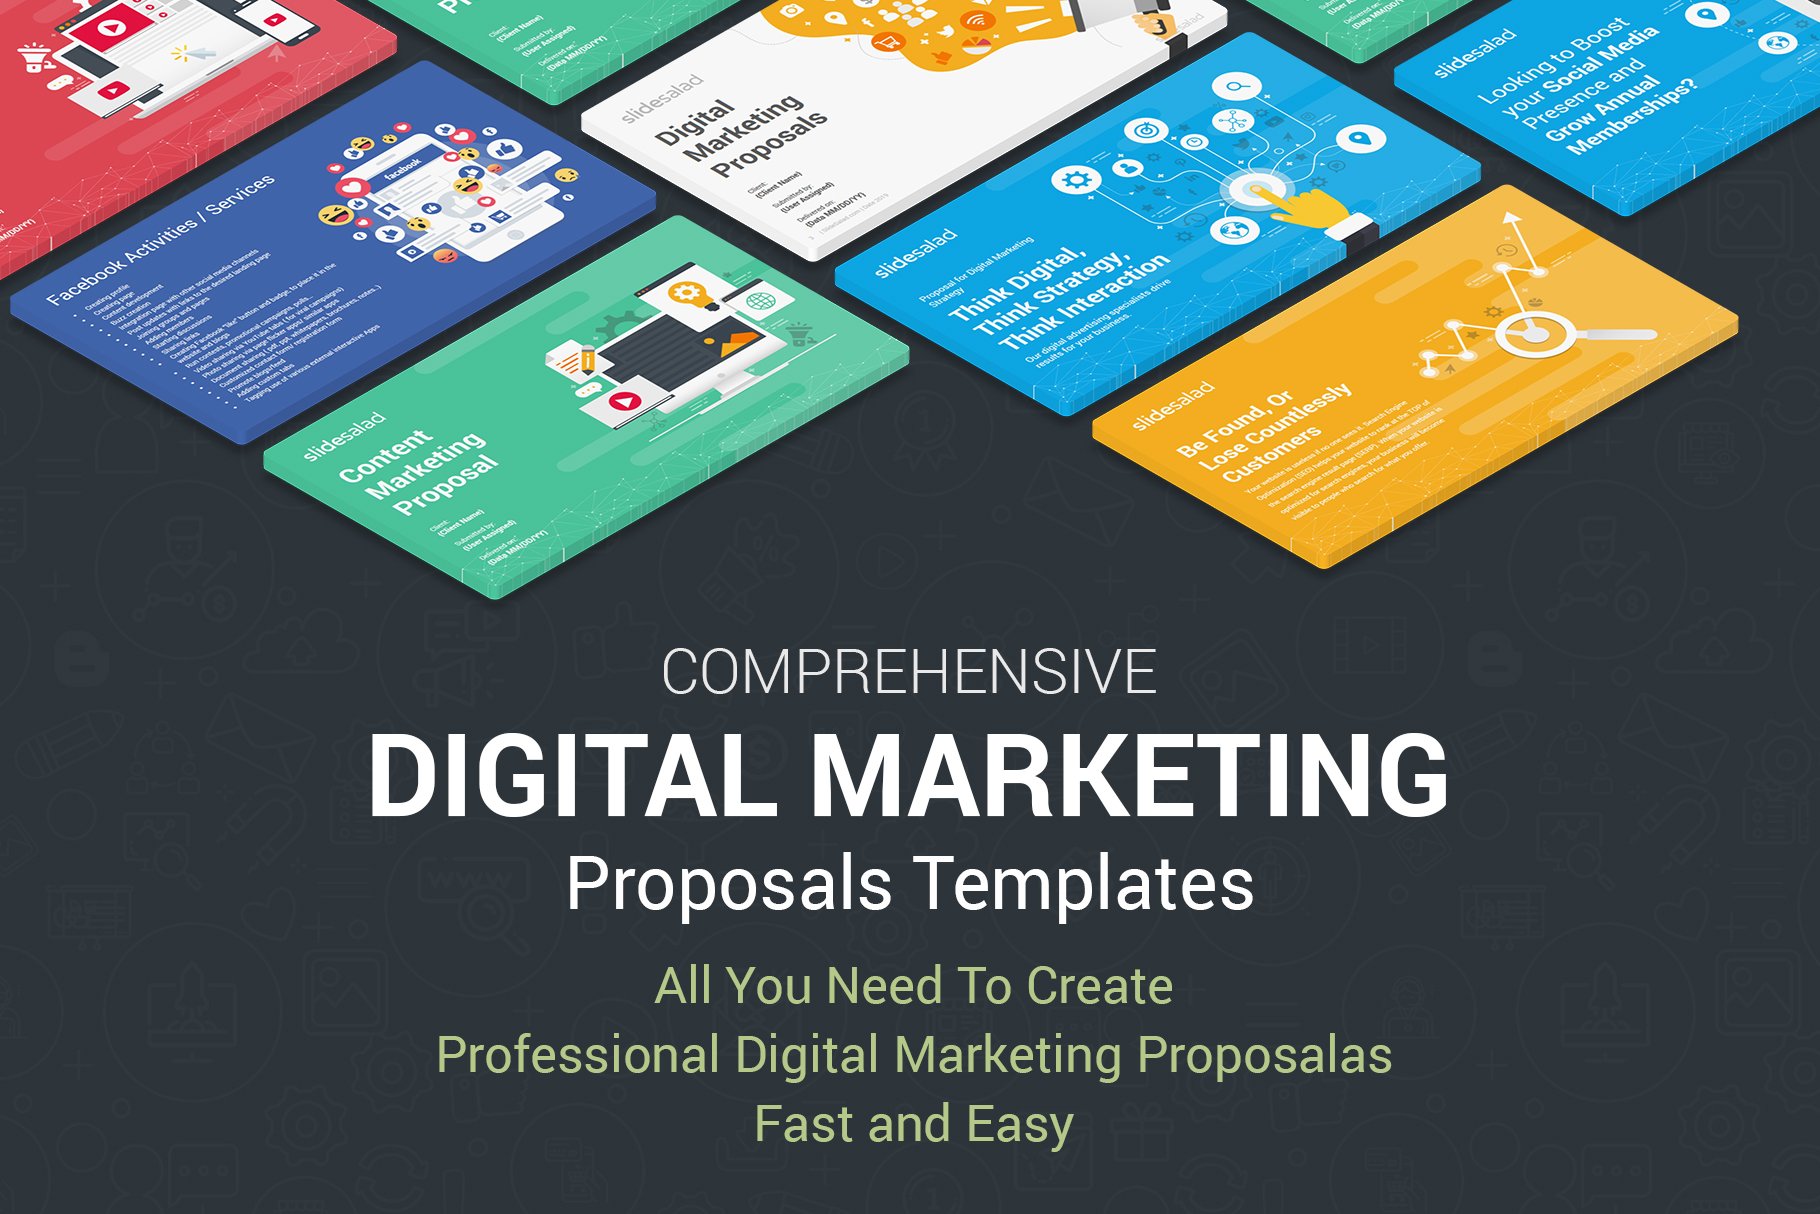 Top Digital Marketing Proposals PPT preview image.